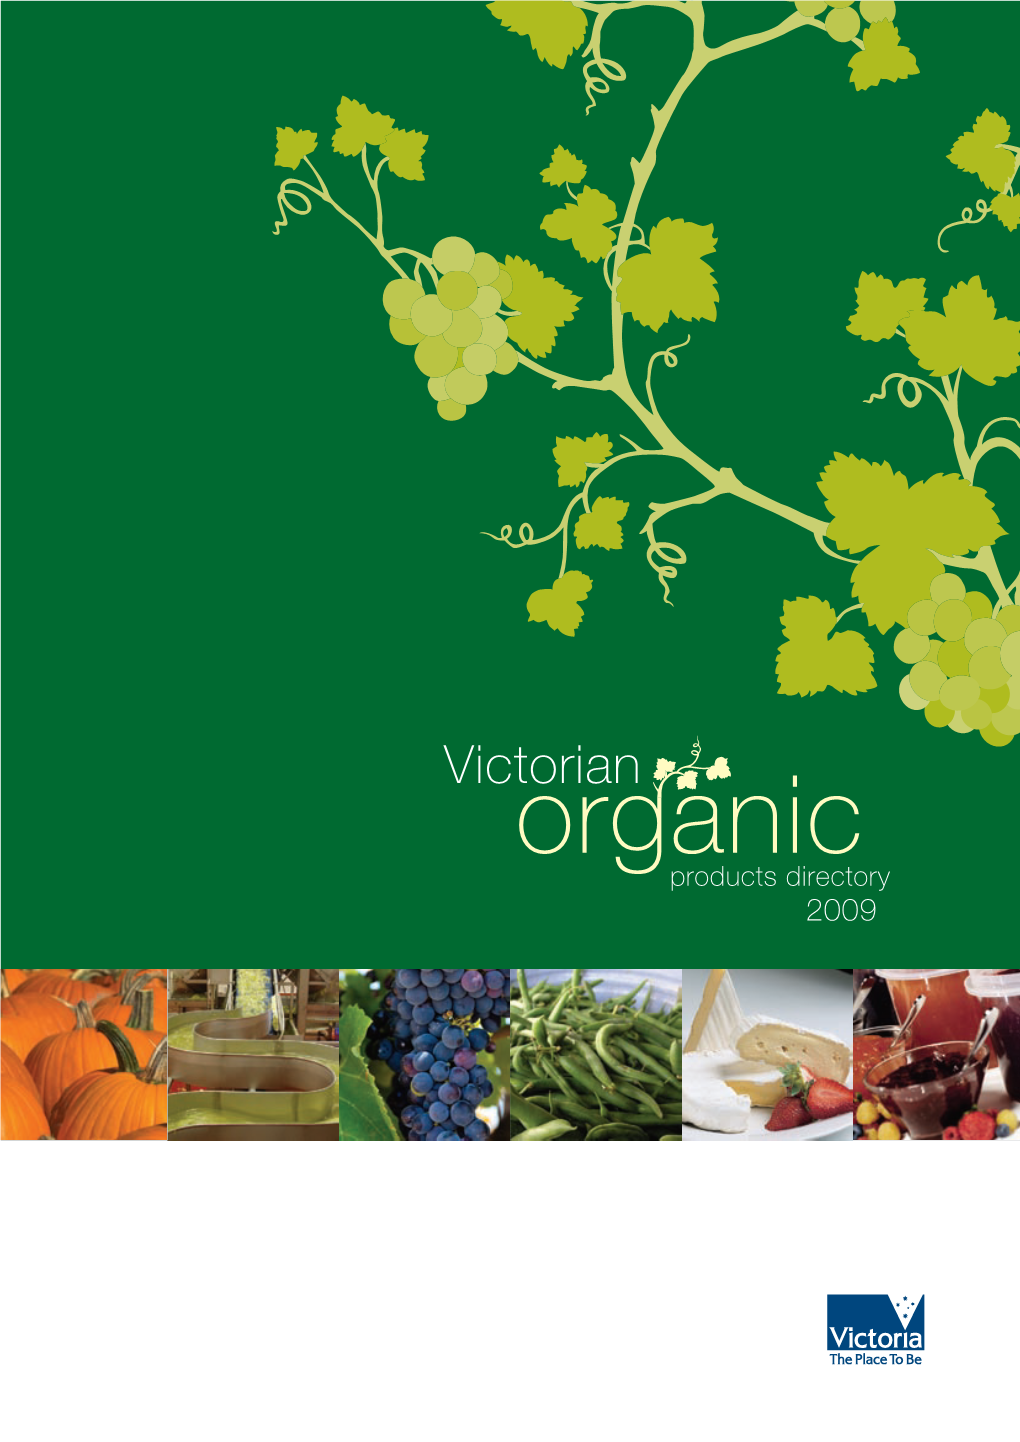 Victorian Organic Products Directory 2009 Is an Updated and Revised Version of the Previous Edition, Published in 2007